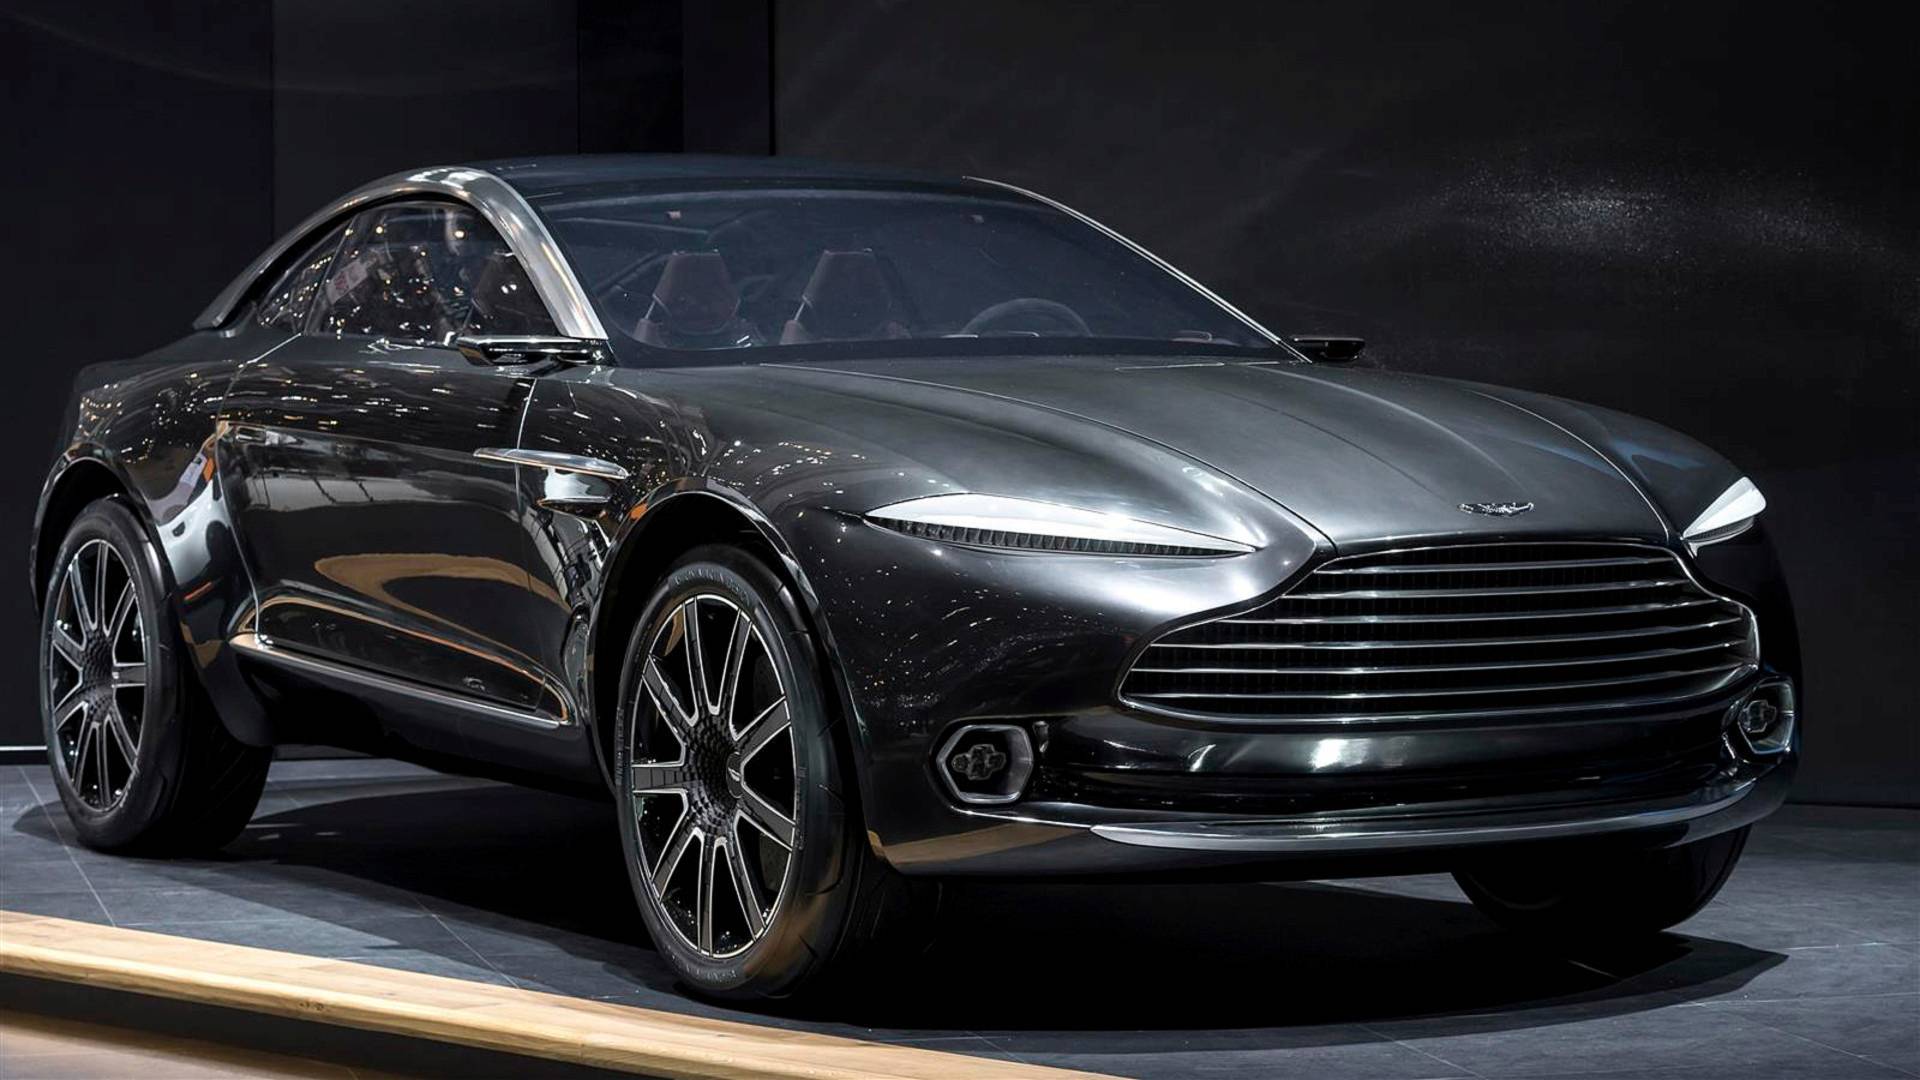 Aston Martin DBX SUV Production Confirmed For 2019